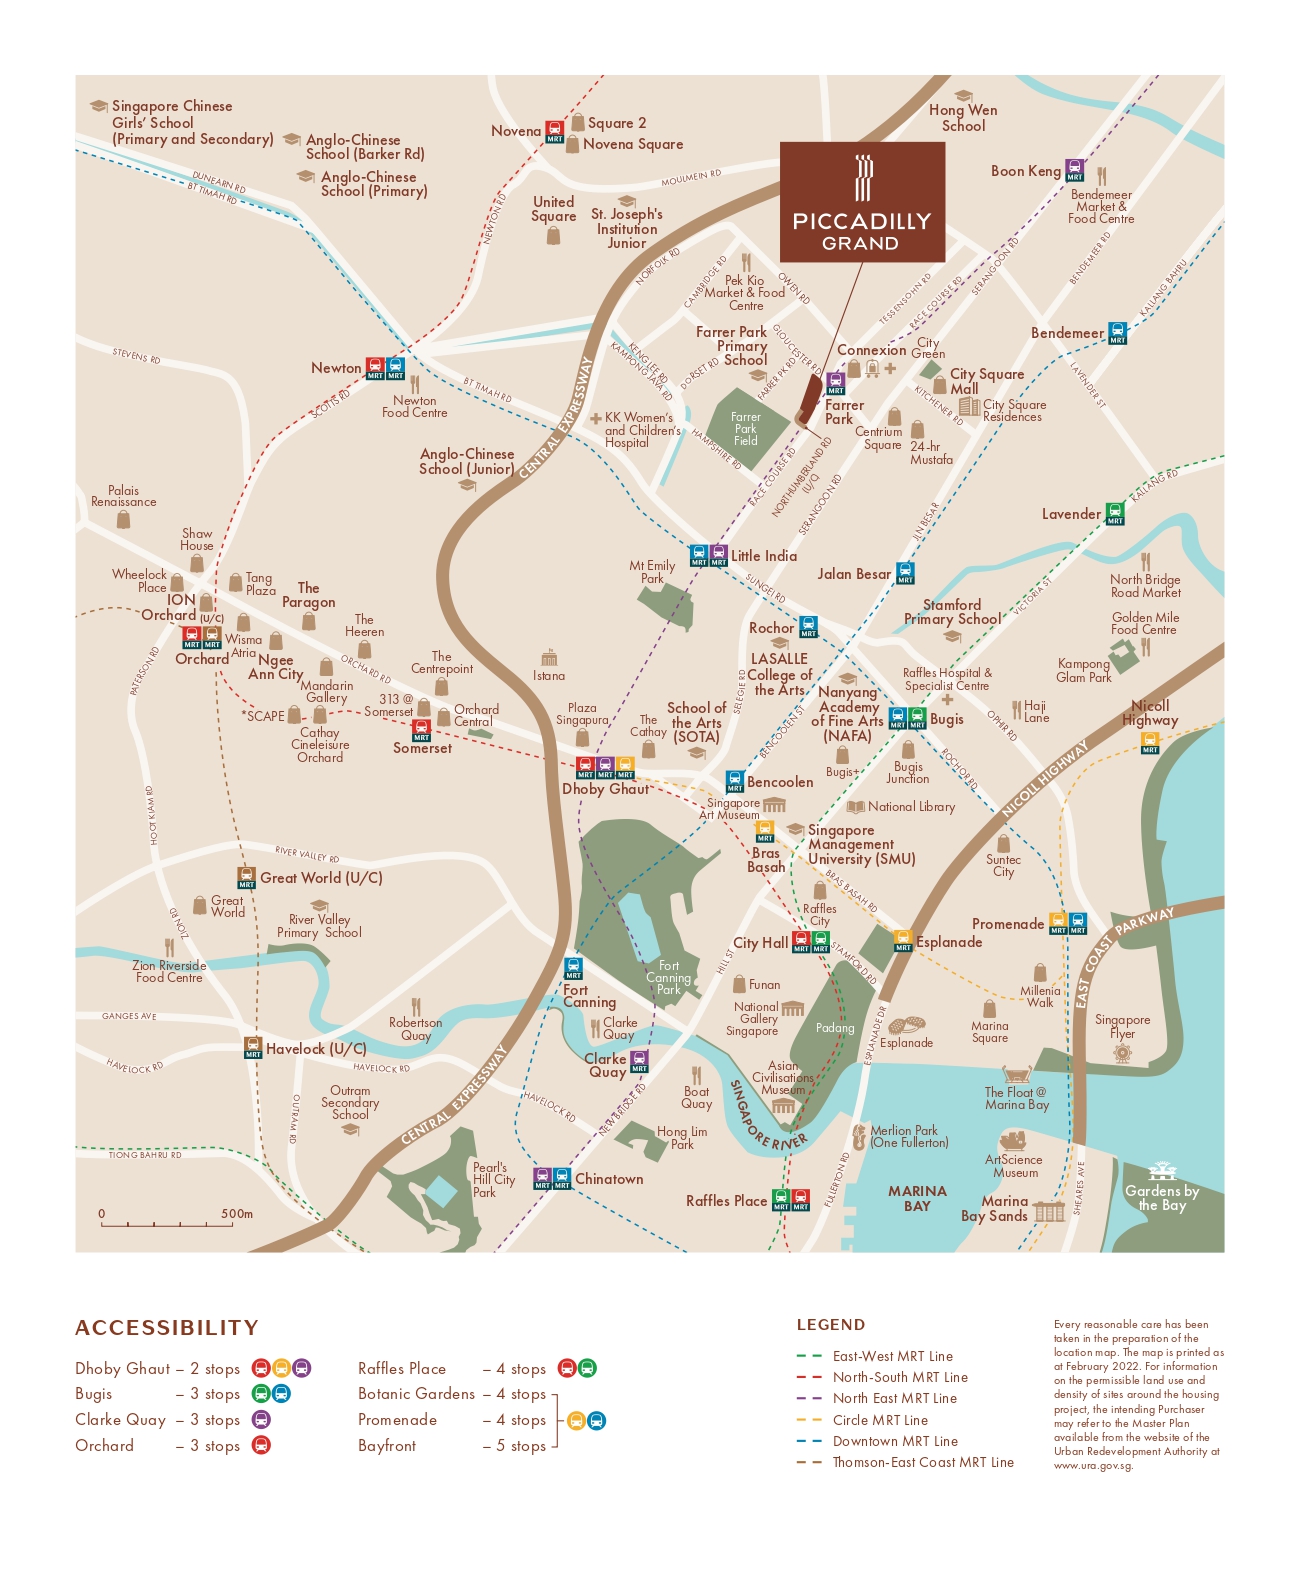 piccadilly-grand-location-map